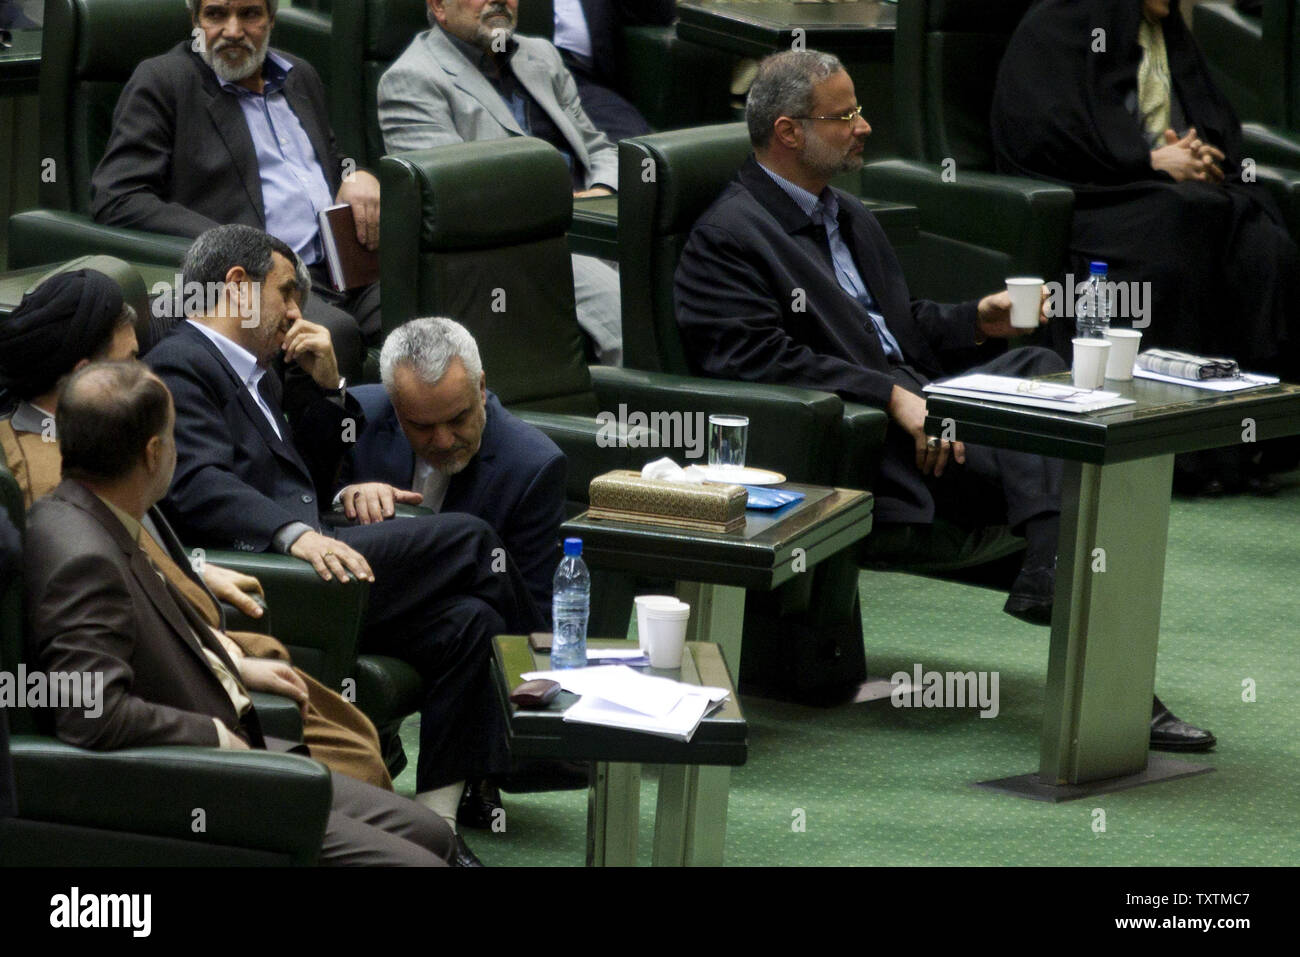 Iranian President Mahmoud Ahmadinejad (L) speaks to Vice President, Mohammad Reza Rahimi (C) during the impeachment of the labor minister , Abdolreza Sheikholeslami (R) at the parliament in Tehran, Iran on February 3, 2013. Out of 272 lawmakers in the parliament on Sunday, 192 voted against the labor minister. The main reason behind the MP's decision to dismiss the minister was Sheikholeslami's refusal  to remove former Tehran prosecutor general Saeed Mortazavi from his post as the director of the Social Security Organization.     UPI/Maryam Rahmanian Stock Photo